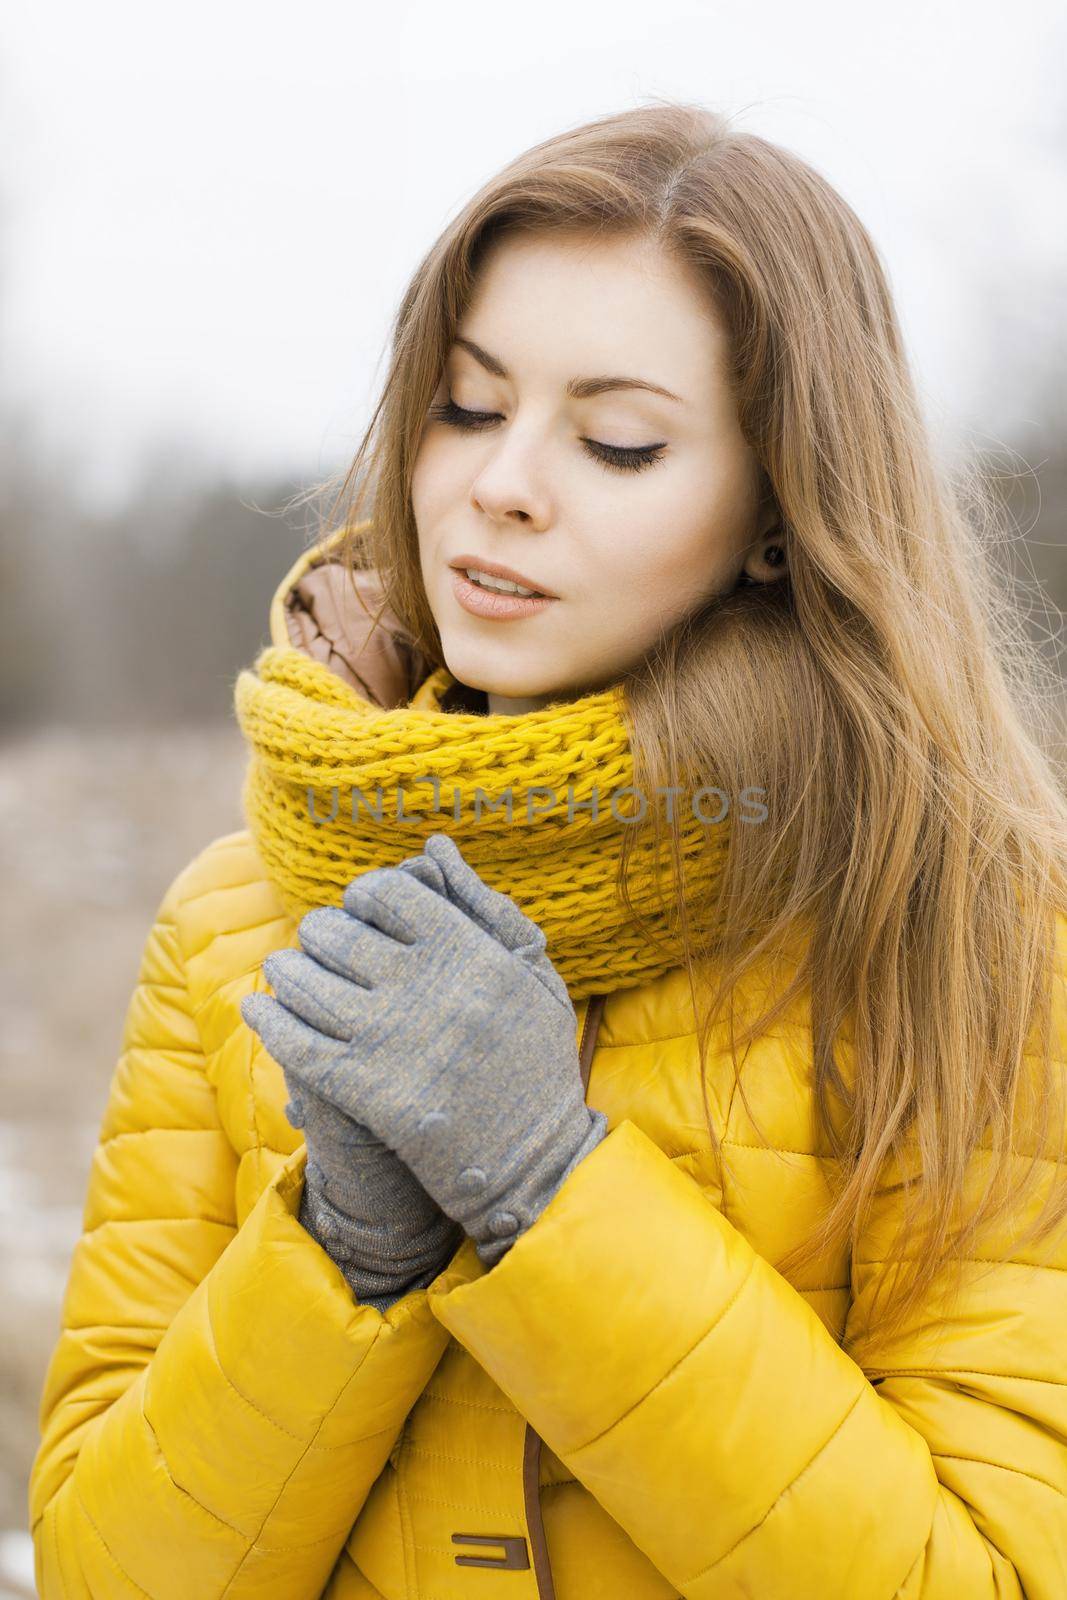 Pretty woman in a yellow knit scarf. Warm hands. Looking down. by alones